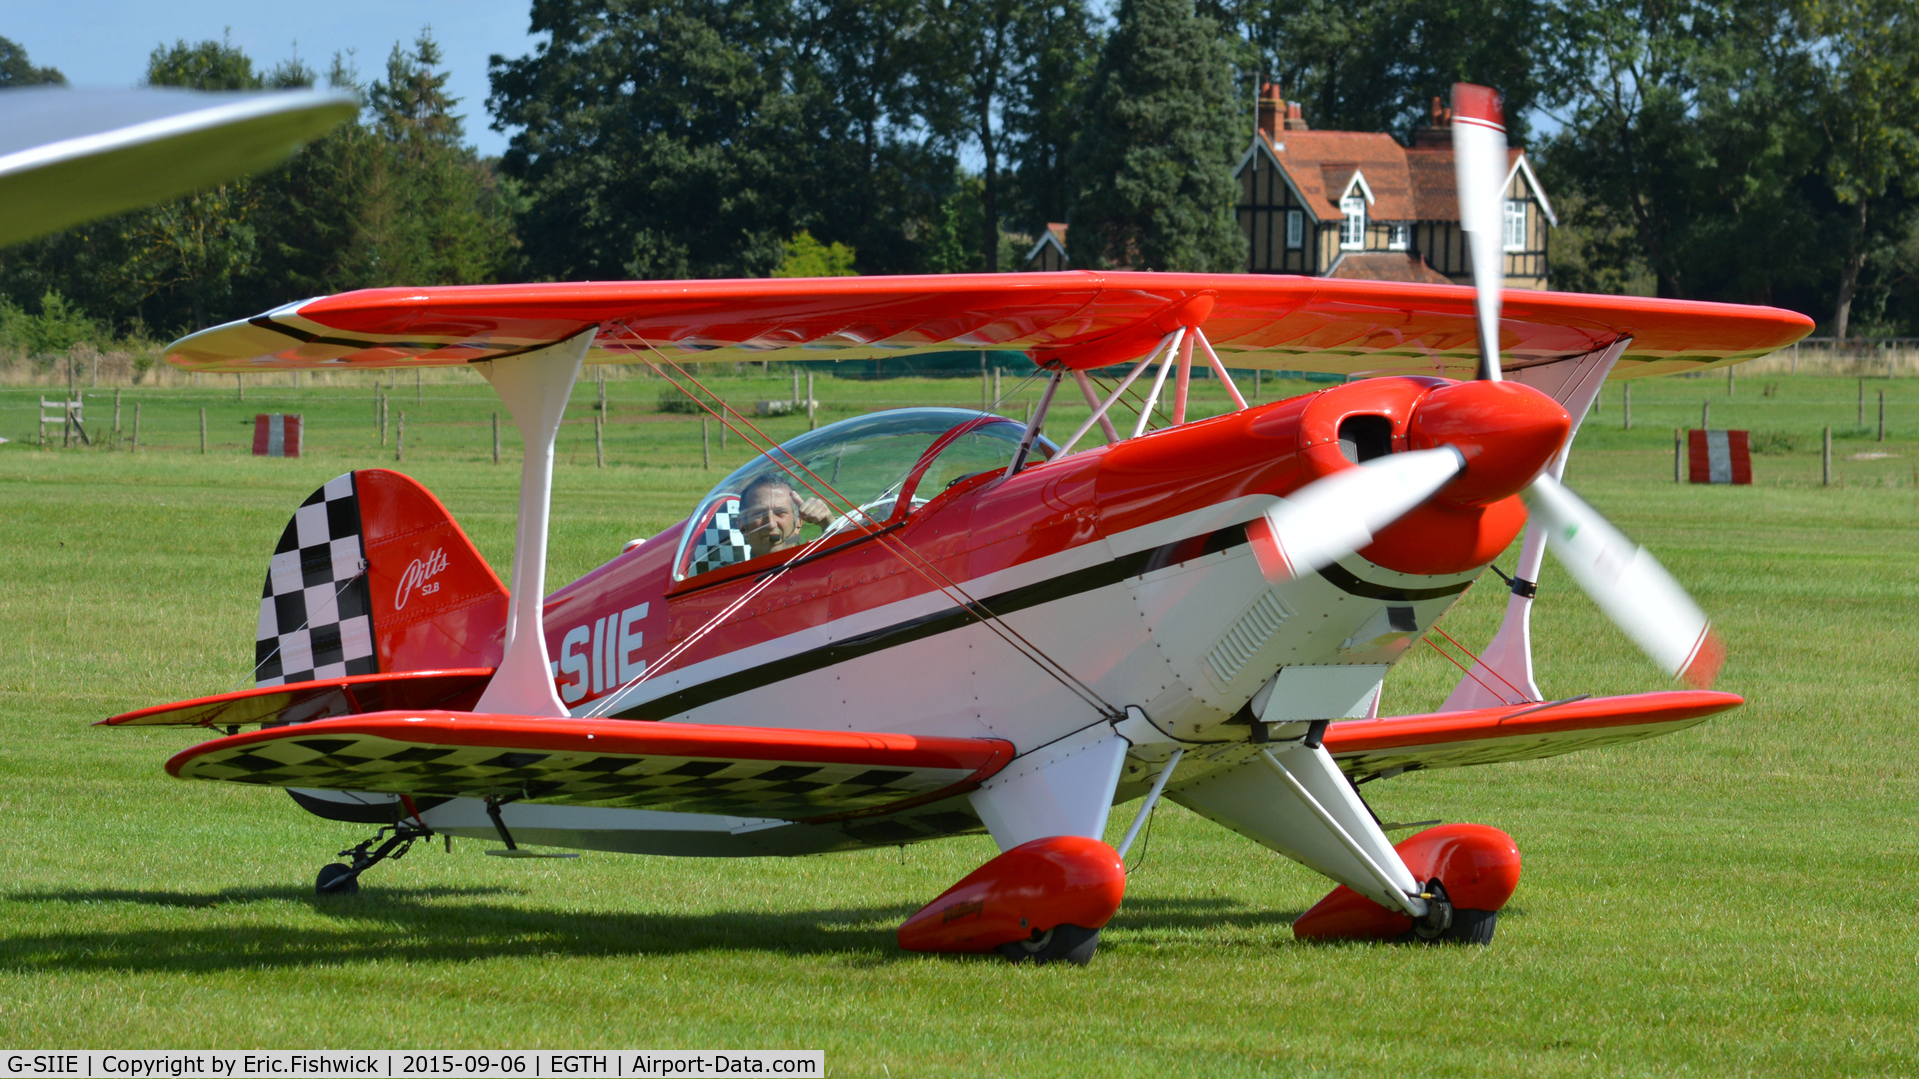 G-SIIE, 1984 Christen Pitts S-2B Special C/N 5057, 3. G-SIIE arriving at The Shuttleworth  Pagent Airshow, Sep. 2015.